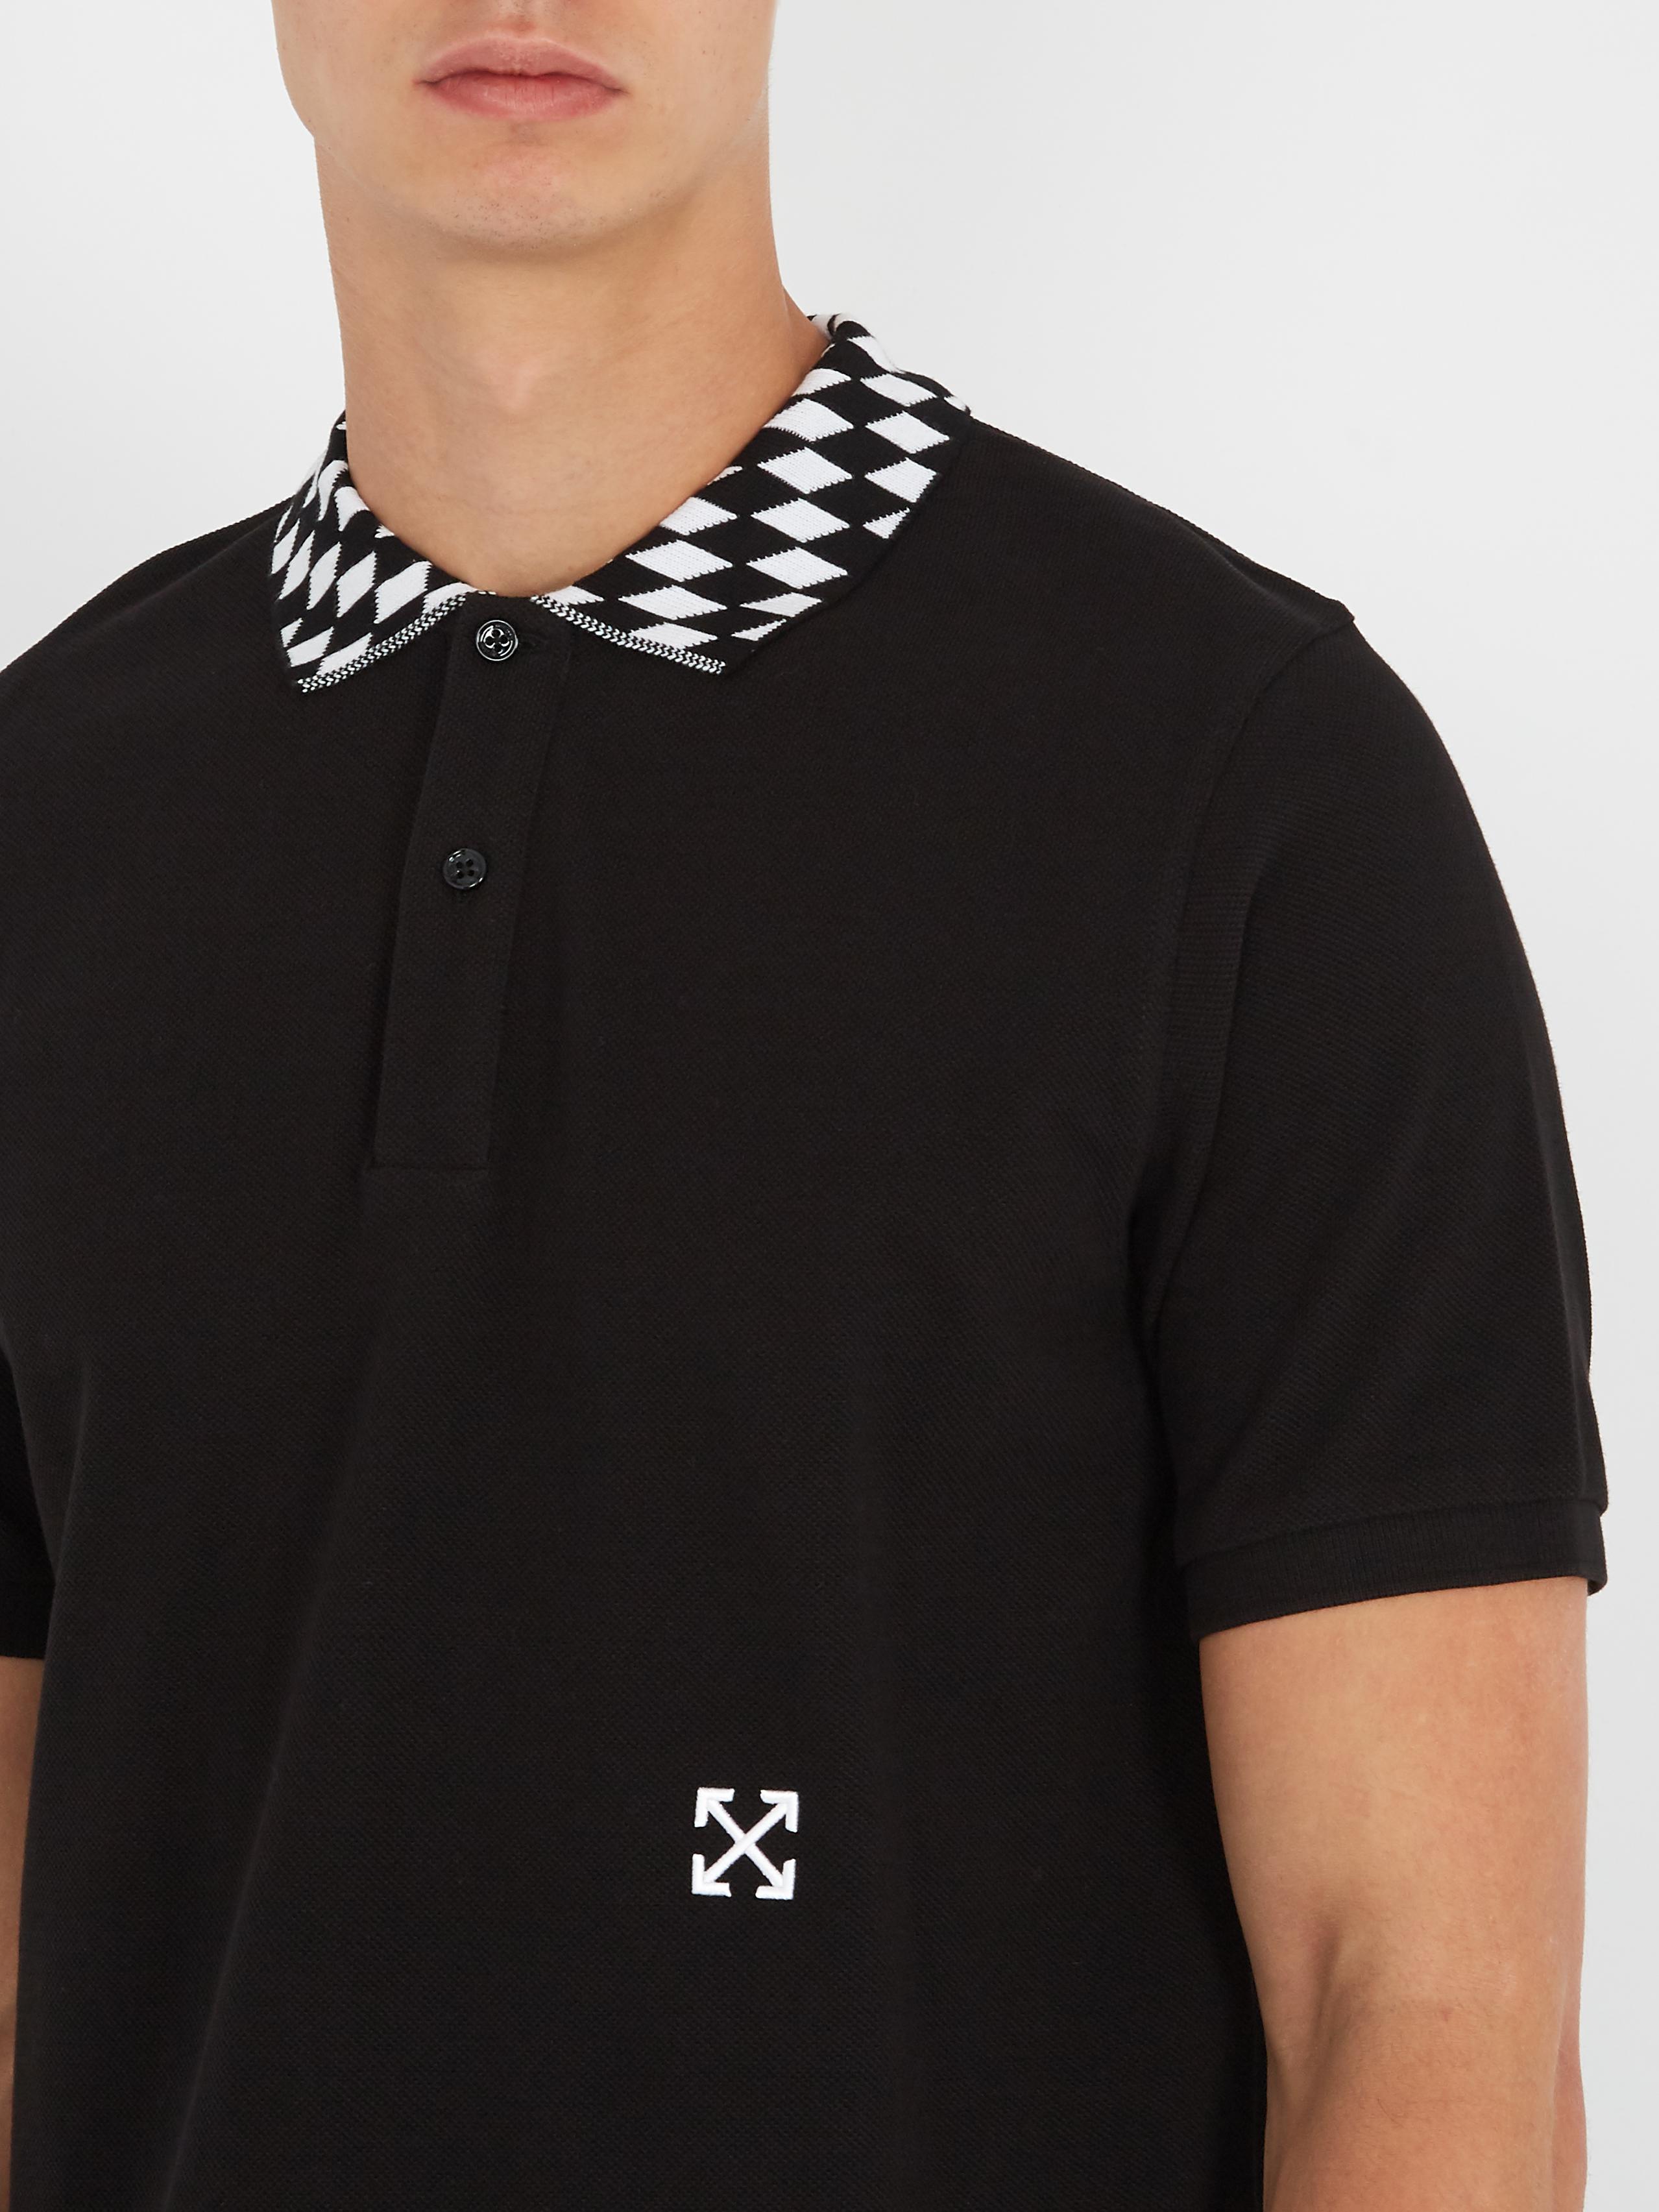 Lyst - Off-White c/o Virgil Abloh Checkered-collar Cotton Polo Shirt in